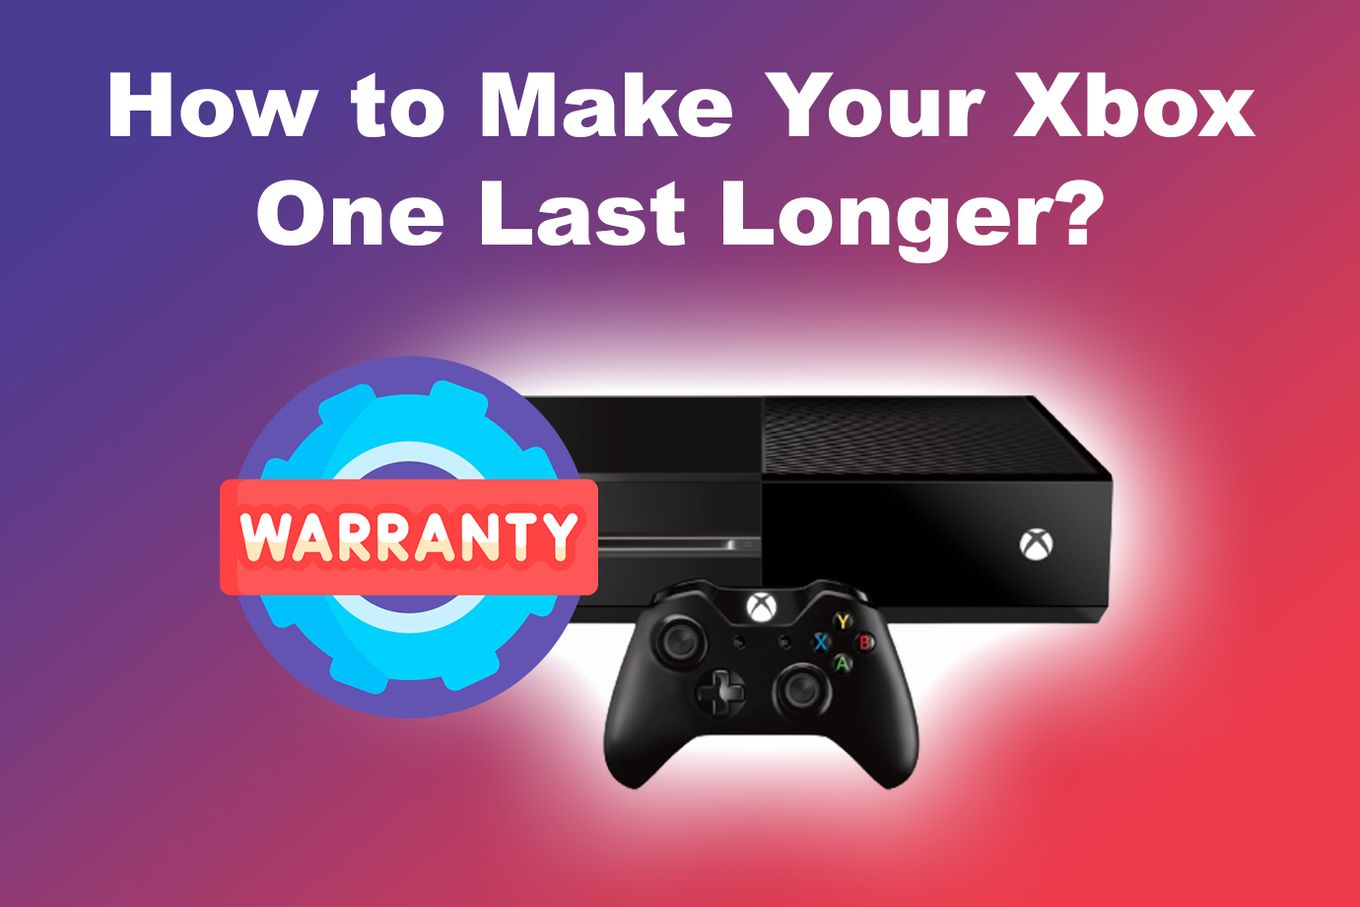 Xbox One controller repair service 1 day turn-around LIFETIME WARRANTY  available